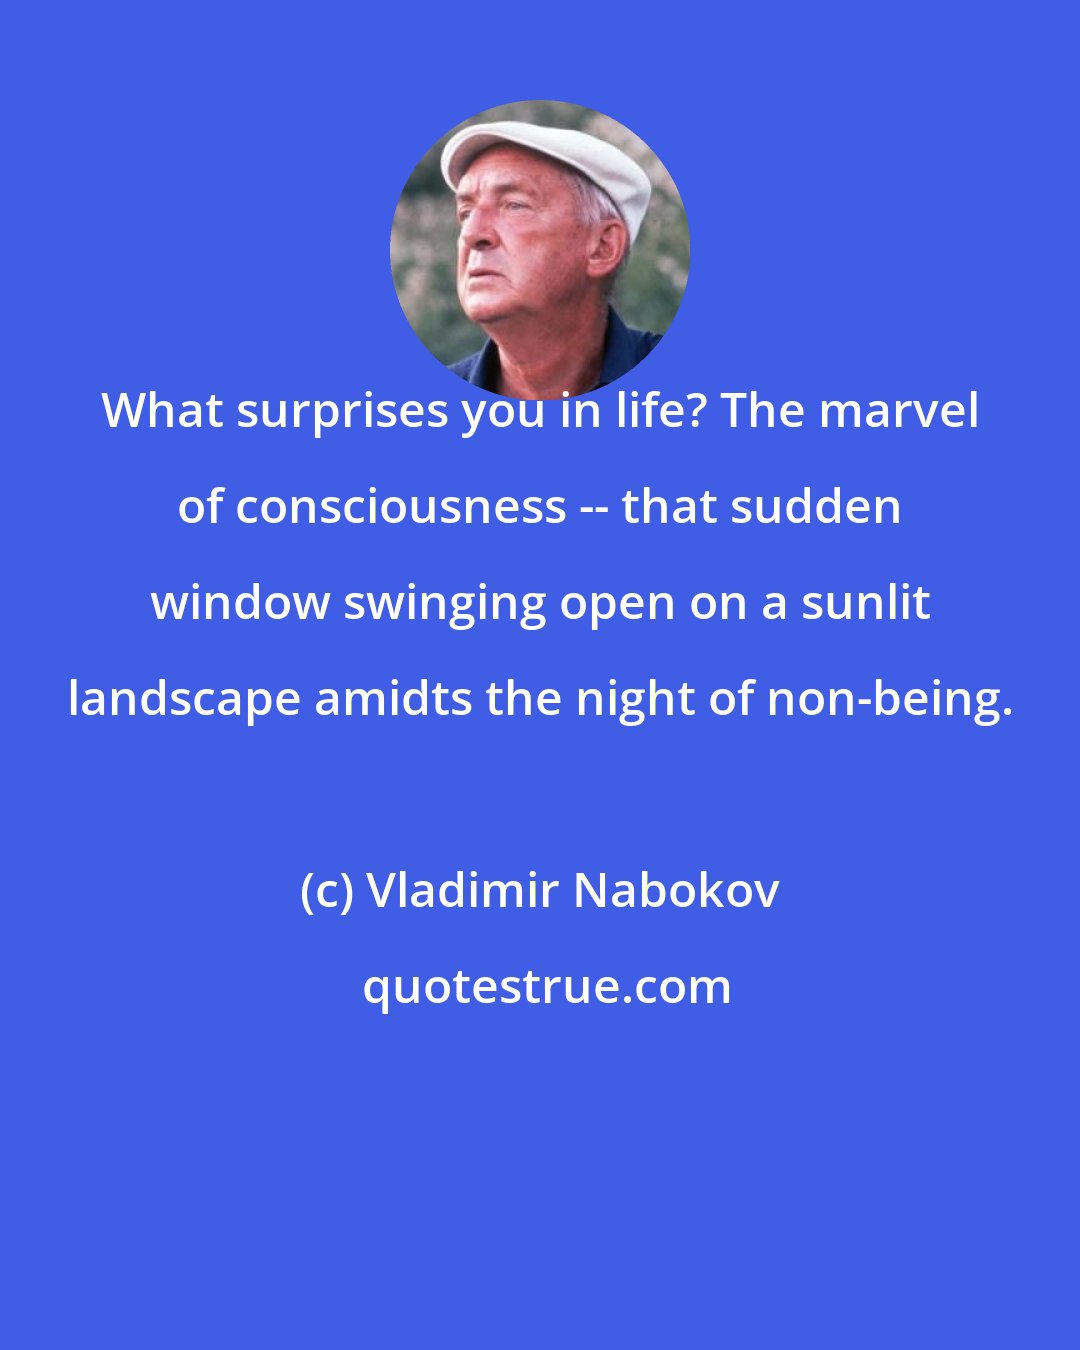 Vladimir Nabokov: What surprises you in life? The marvel of consciousness -- that sudden window swinging open on a sunlit landscape amidts the night of non-being.